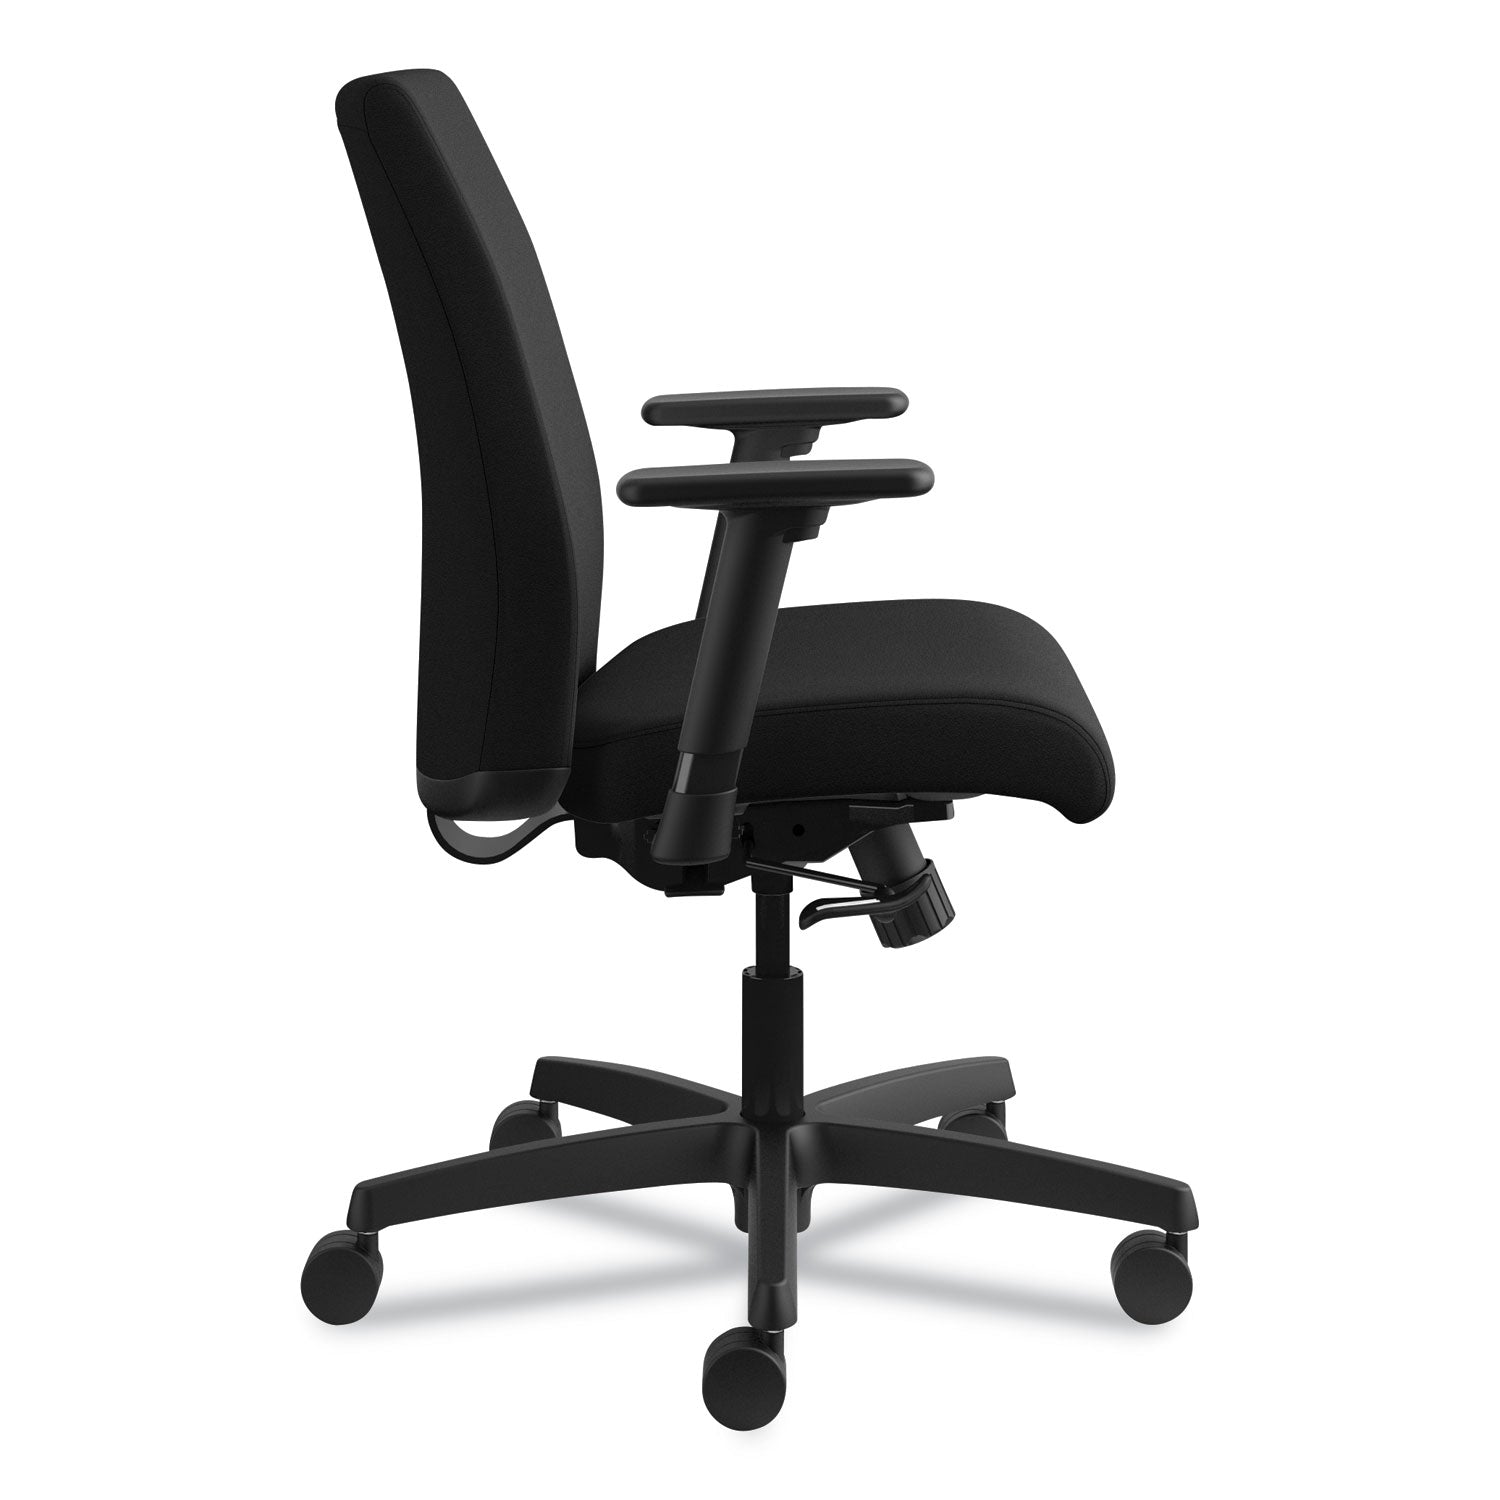 ignition-series-fabric-low-back-task-chair-supports-up-to-300-lb-17-to-215-seat-height-black_honit105cu10 - 4